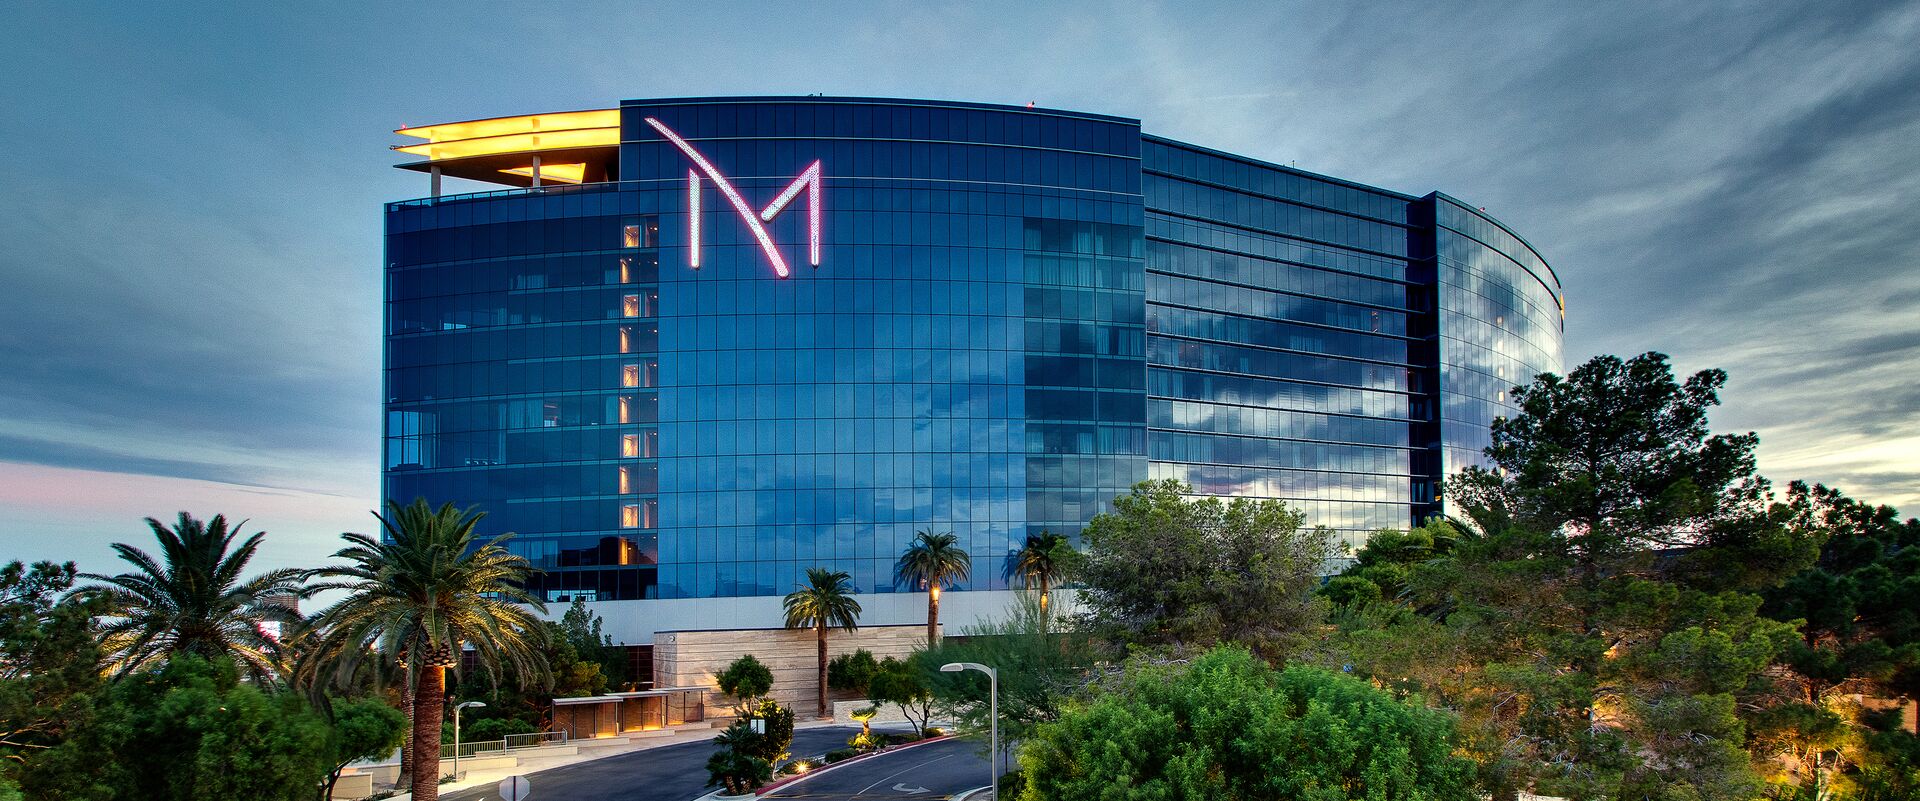 Exterior of The M Resort